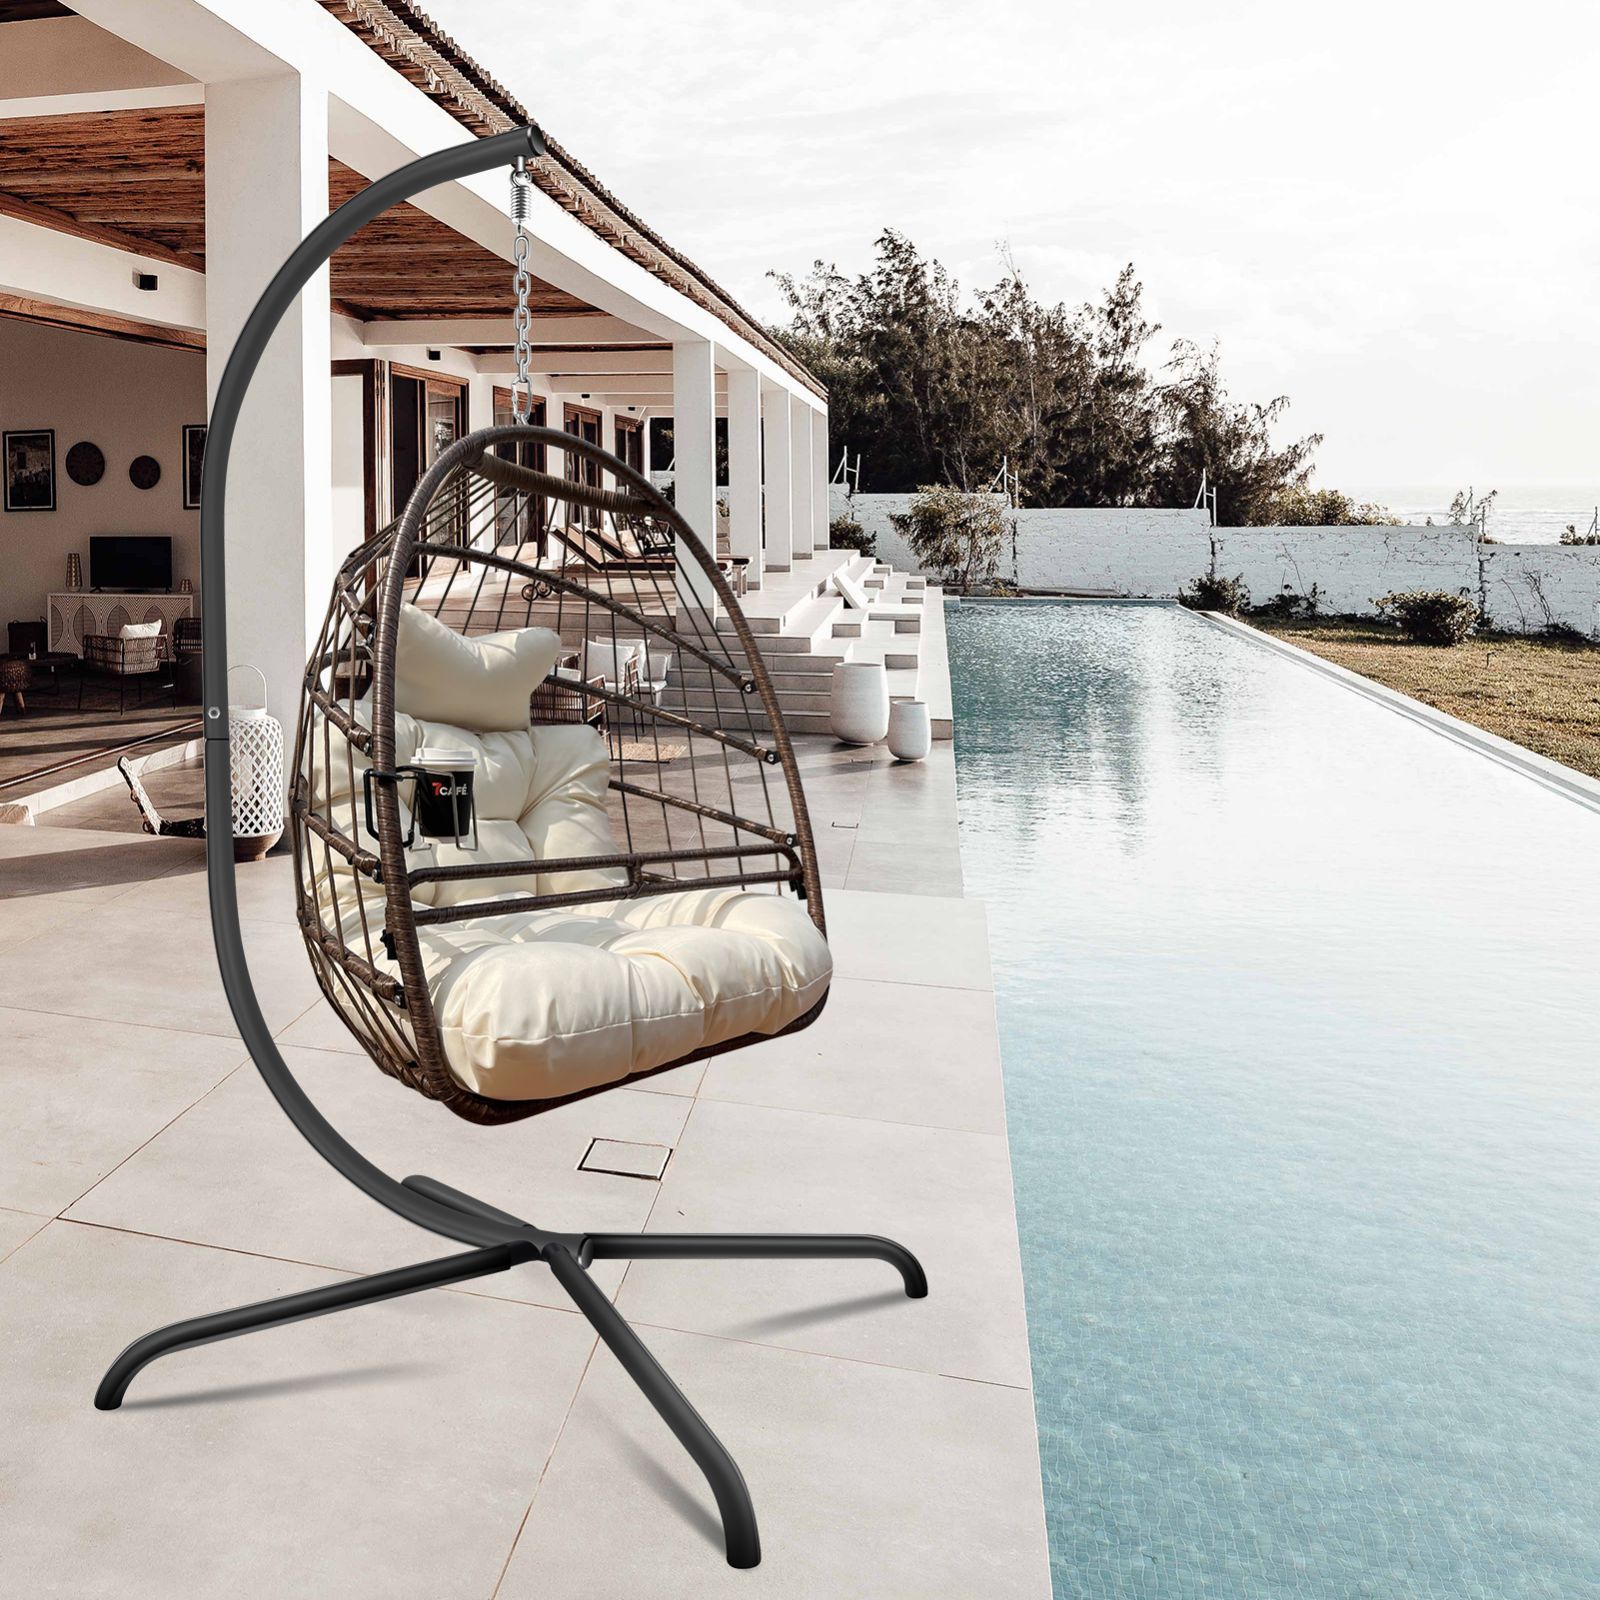 Serenity Swing Egg Chair with Guardrail, Cup Holder, and Thick Cushion